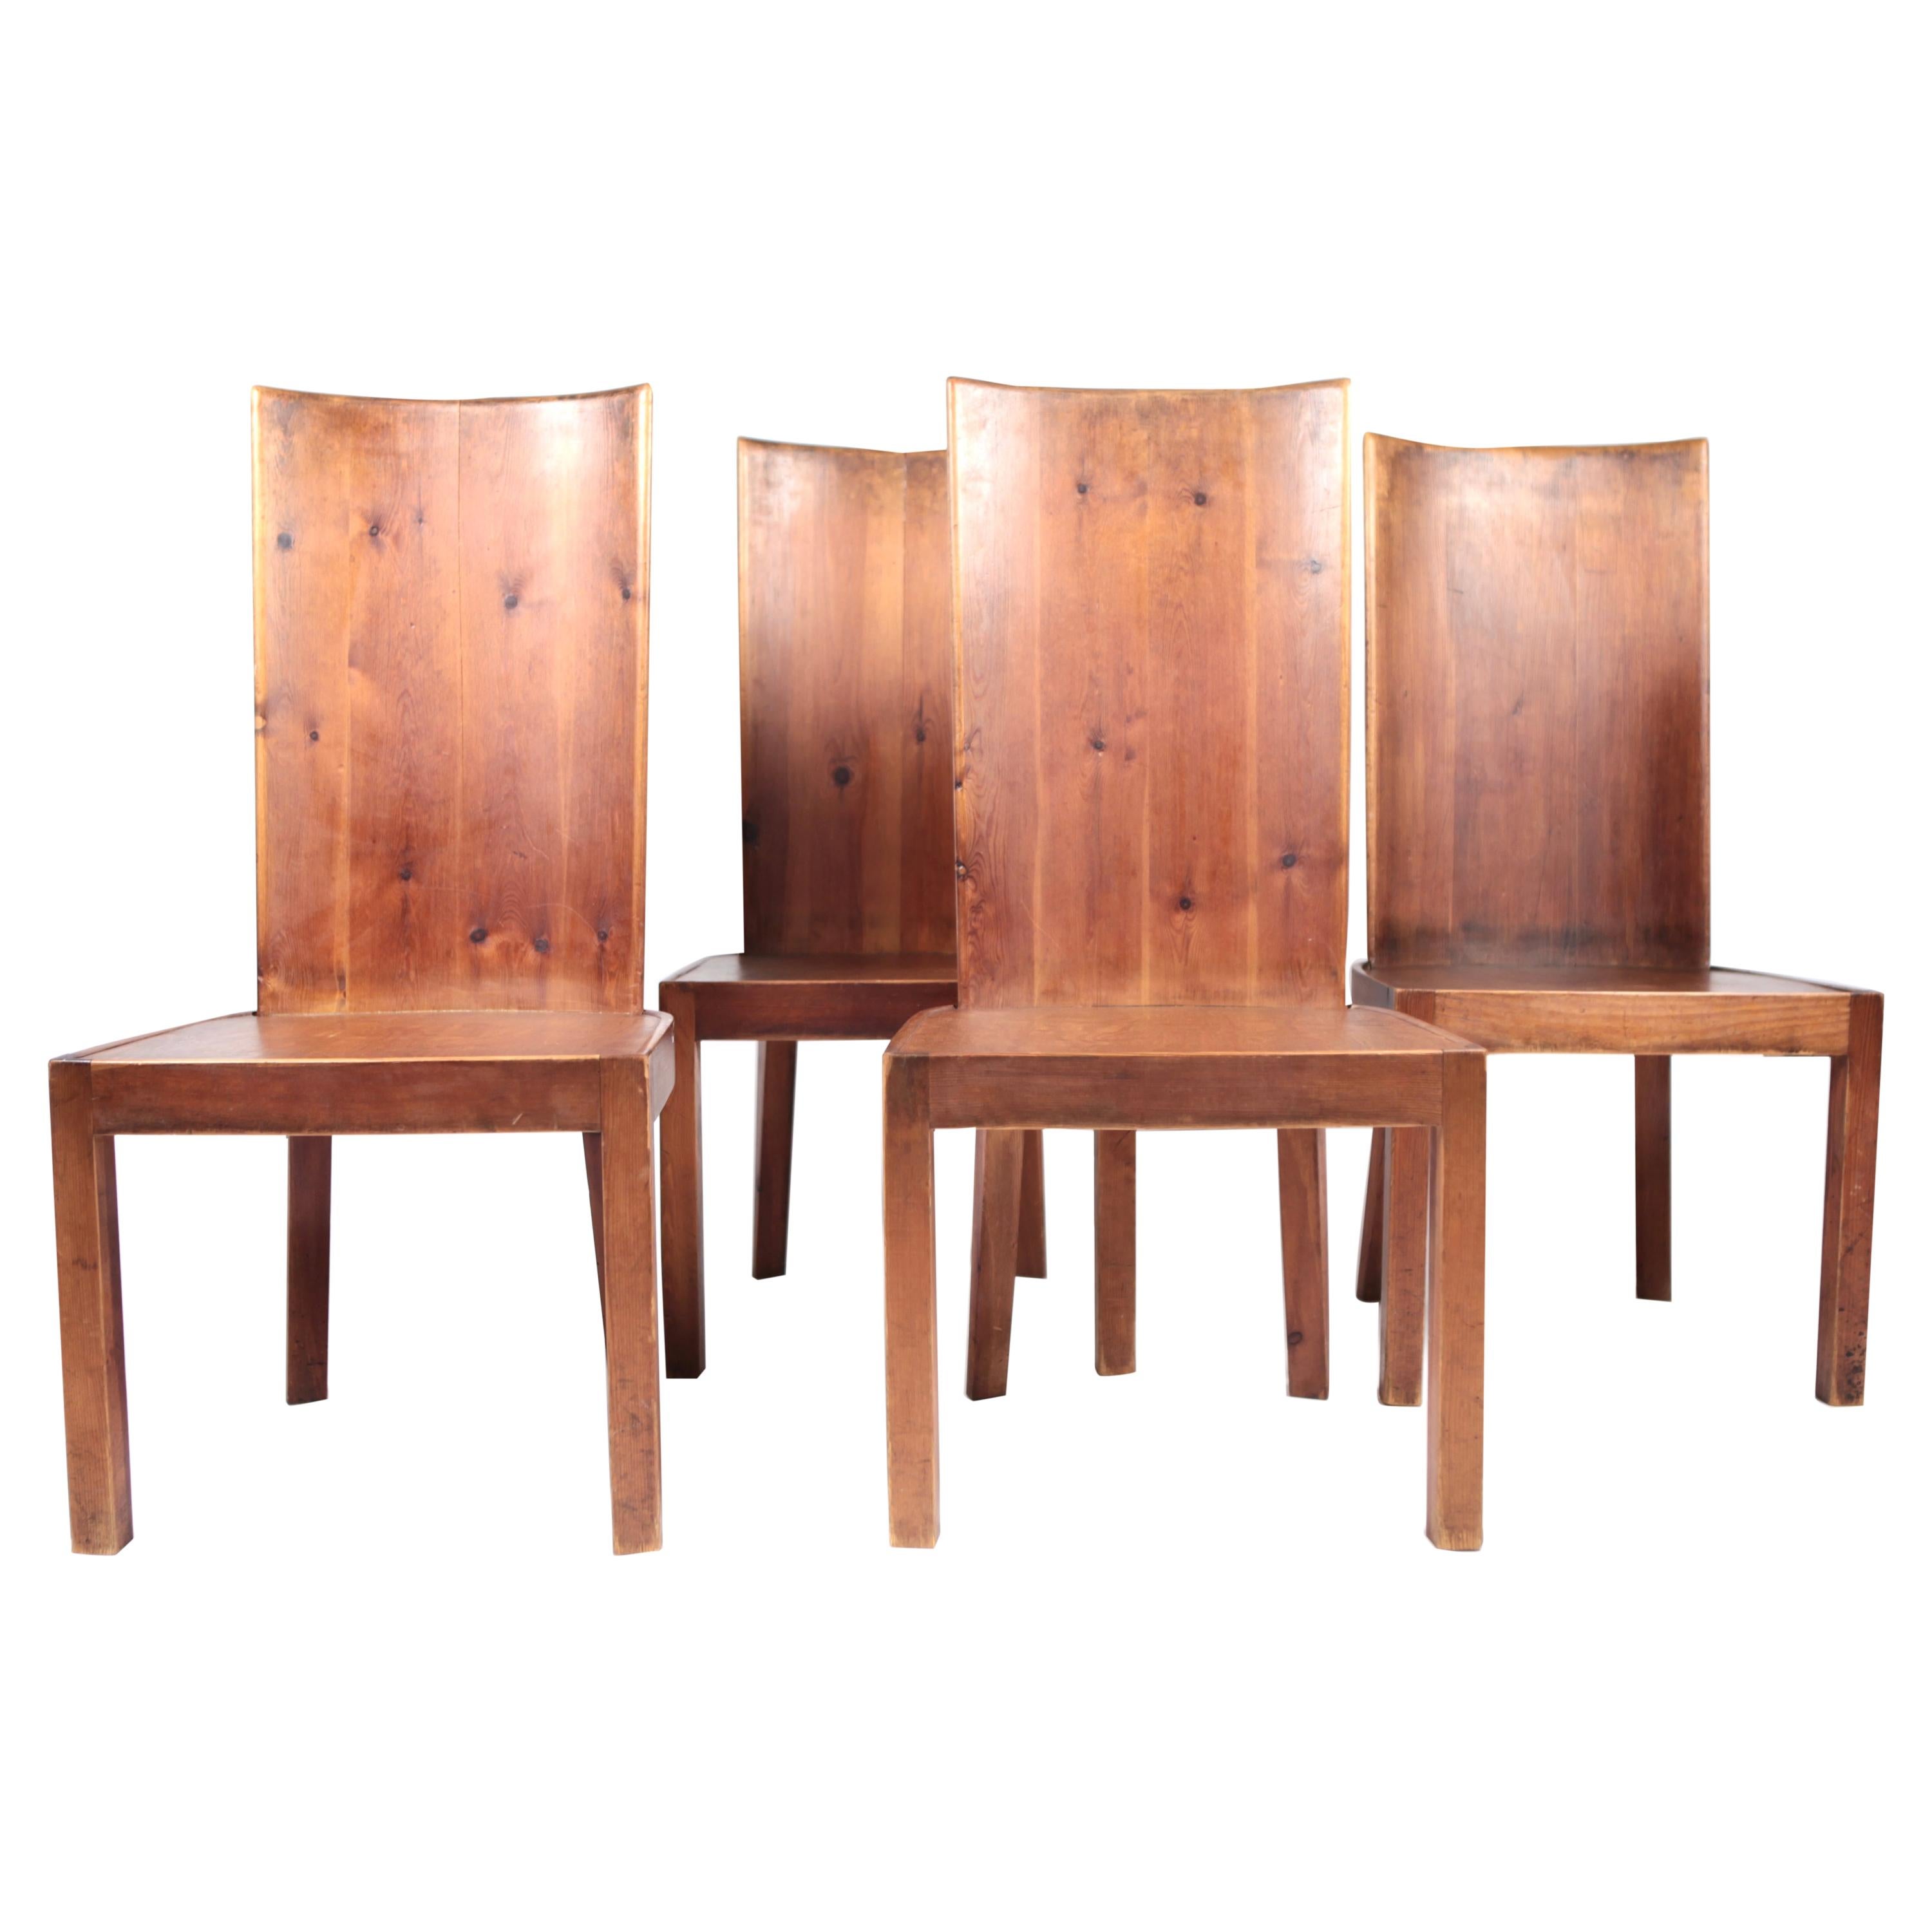 Set of 4 High Back Stained Pine Chairs, Attributed to Axel Einar Hjorth, Sweden  For Sale